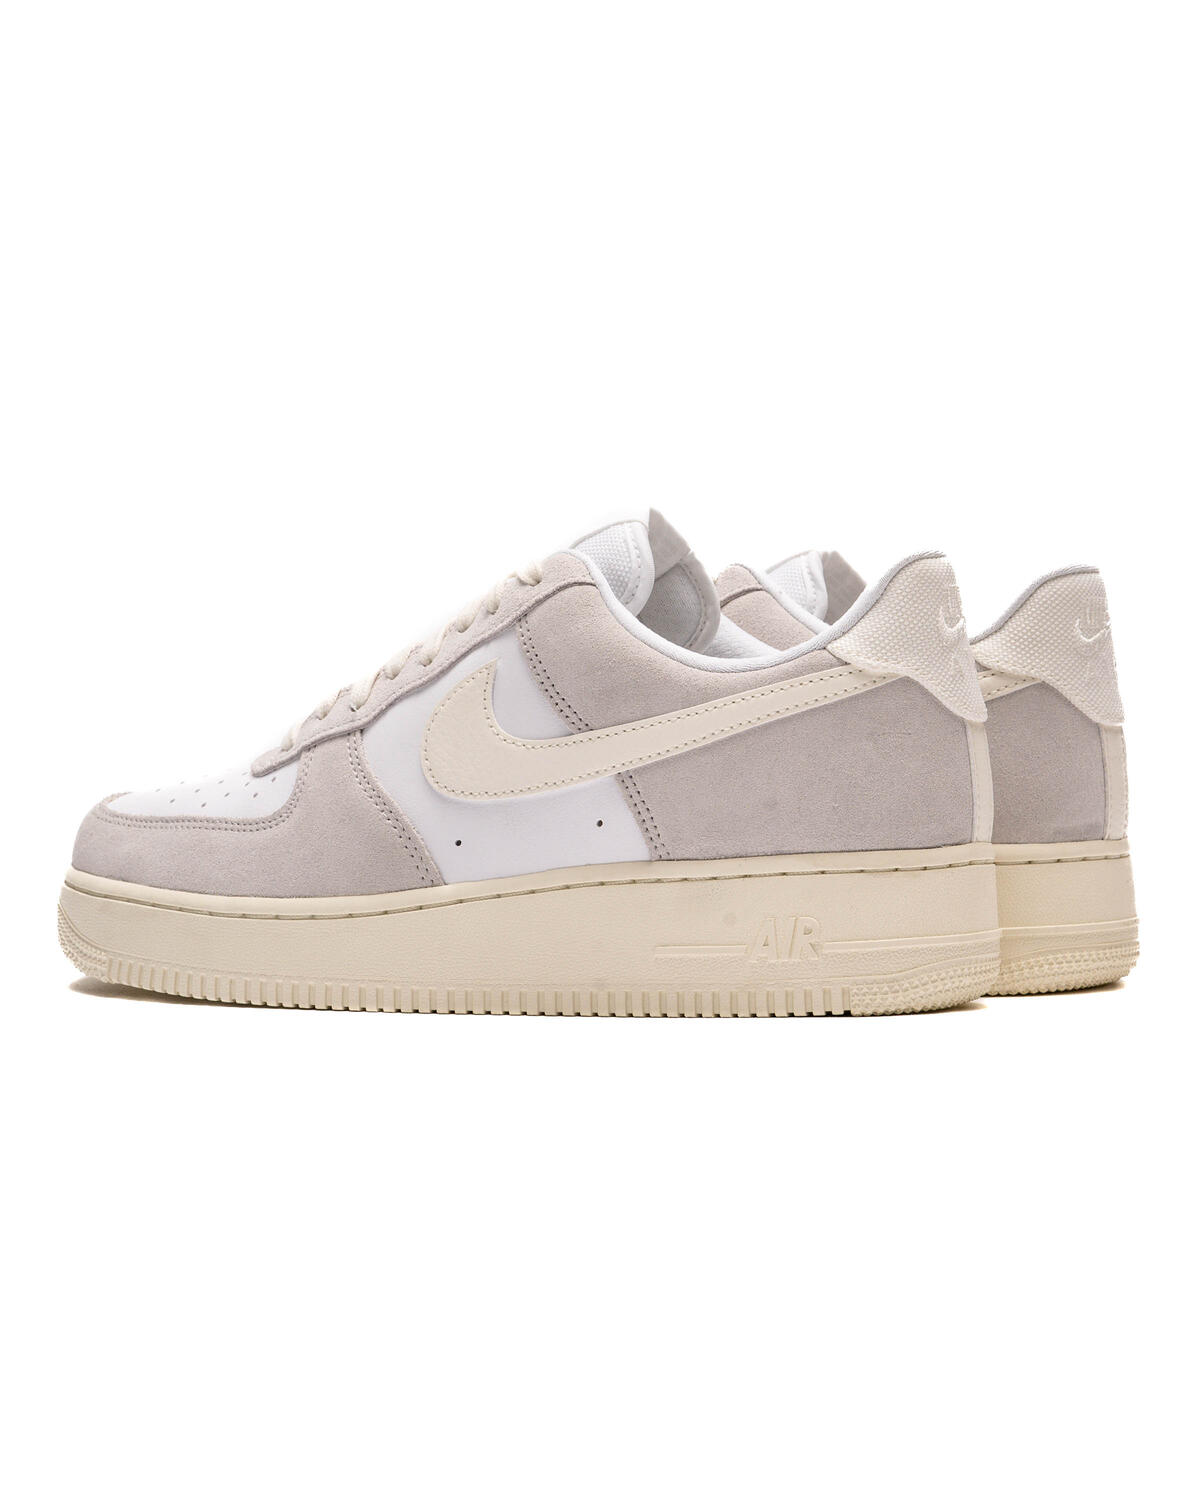 Nike Air Force 1 LV8 - Platinum Tint - CW7584-100 | OUTBACK Sylt